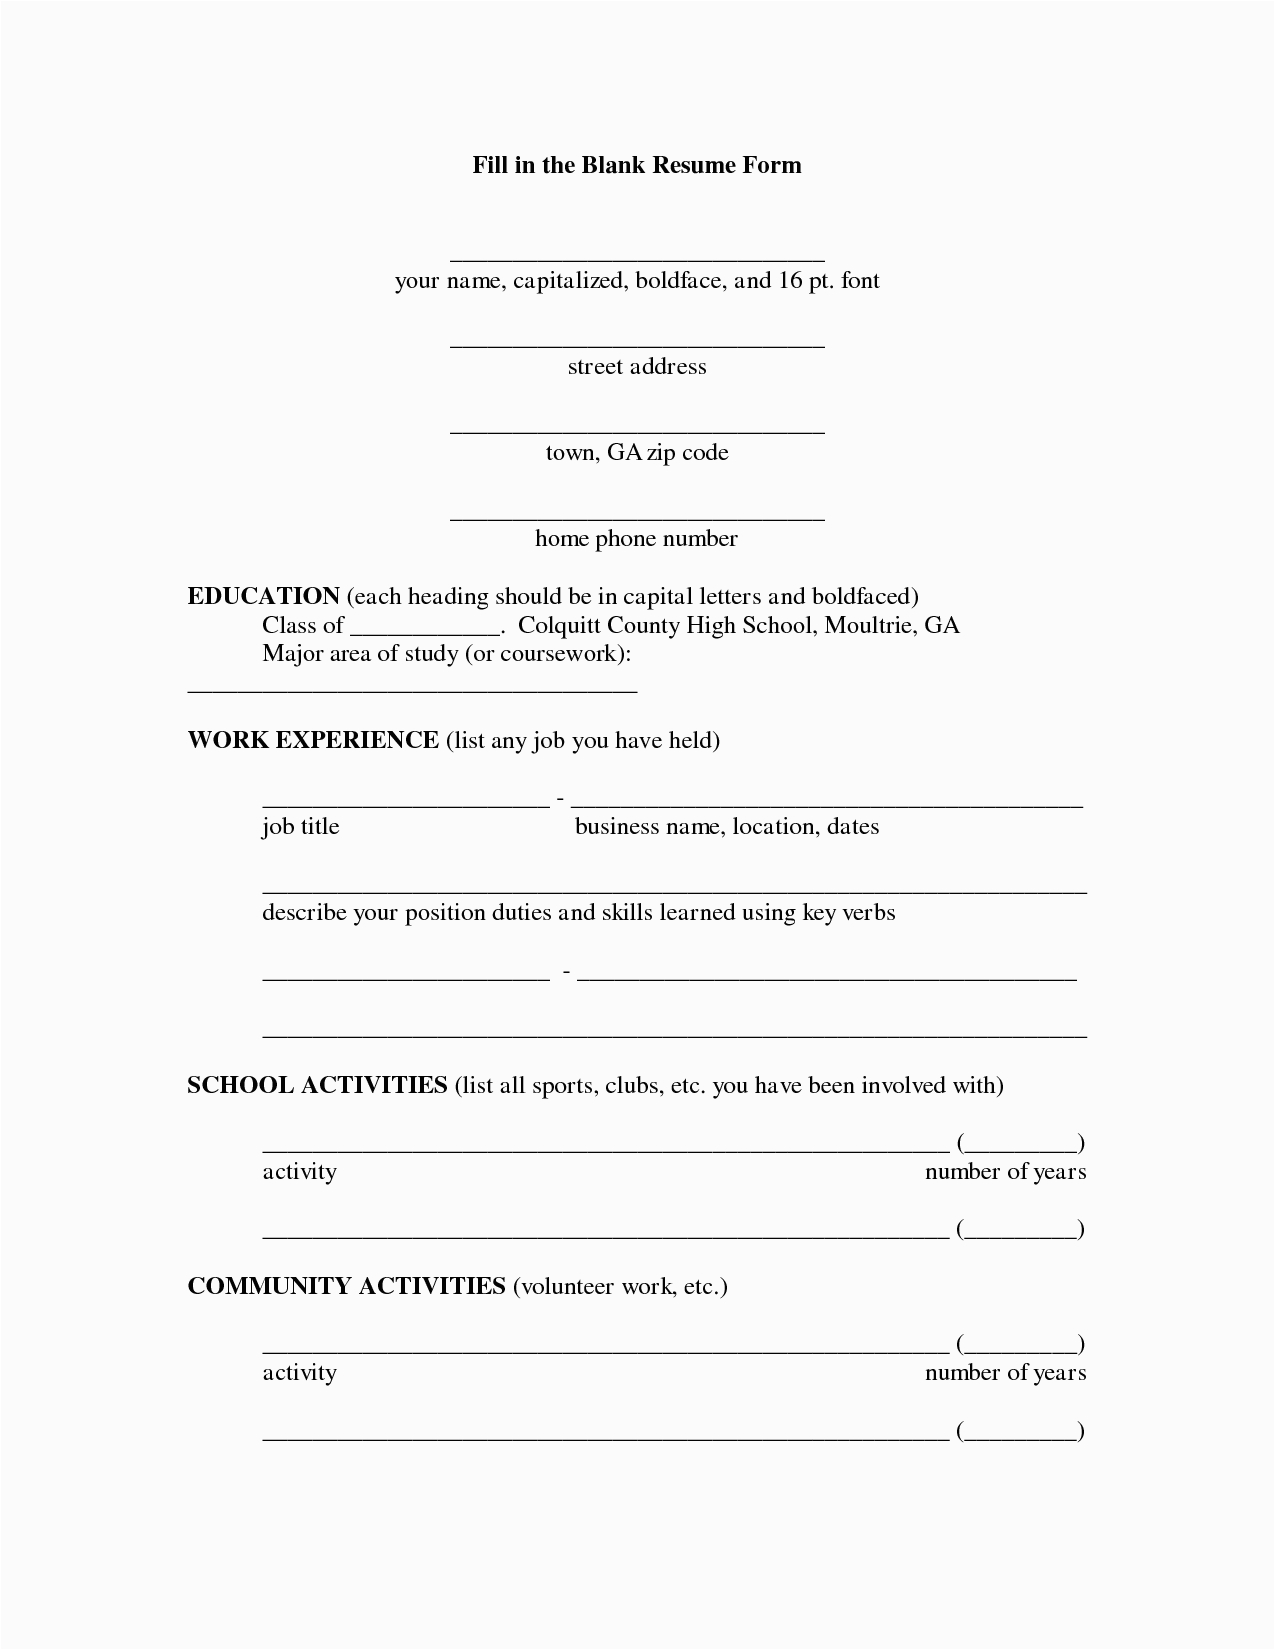 Fill In the Blank Functional Resume Template Resume to Fill Out Resume Sample